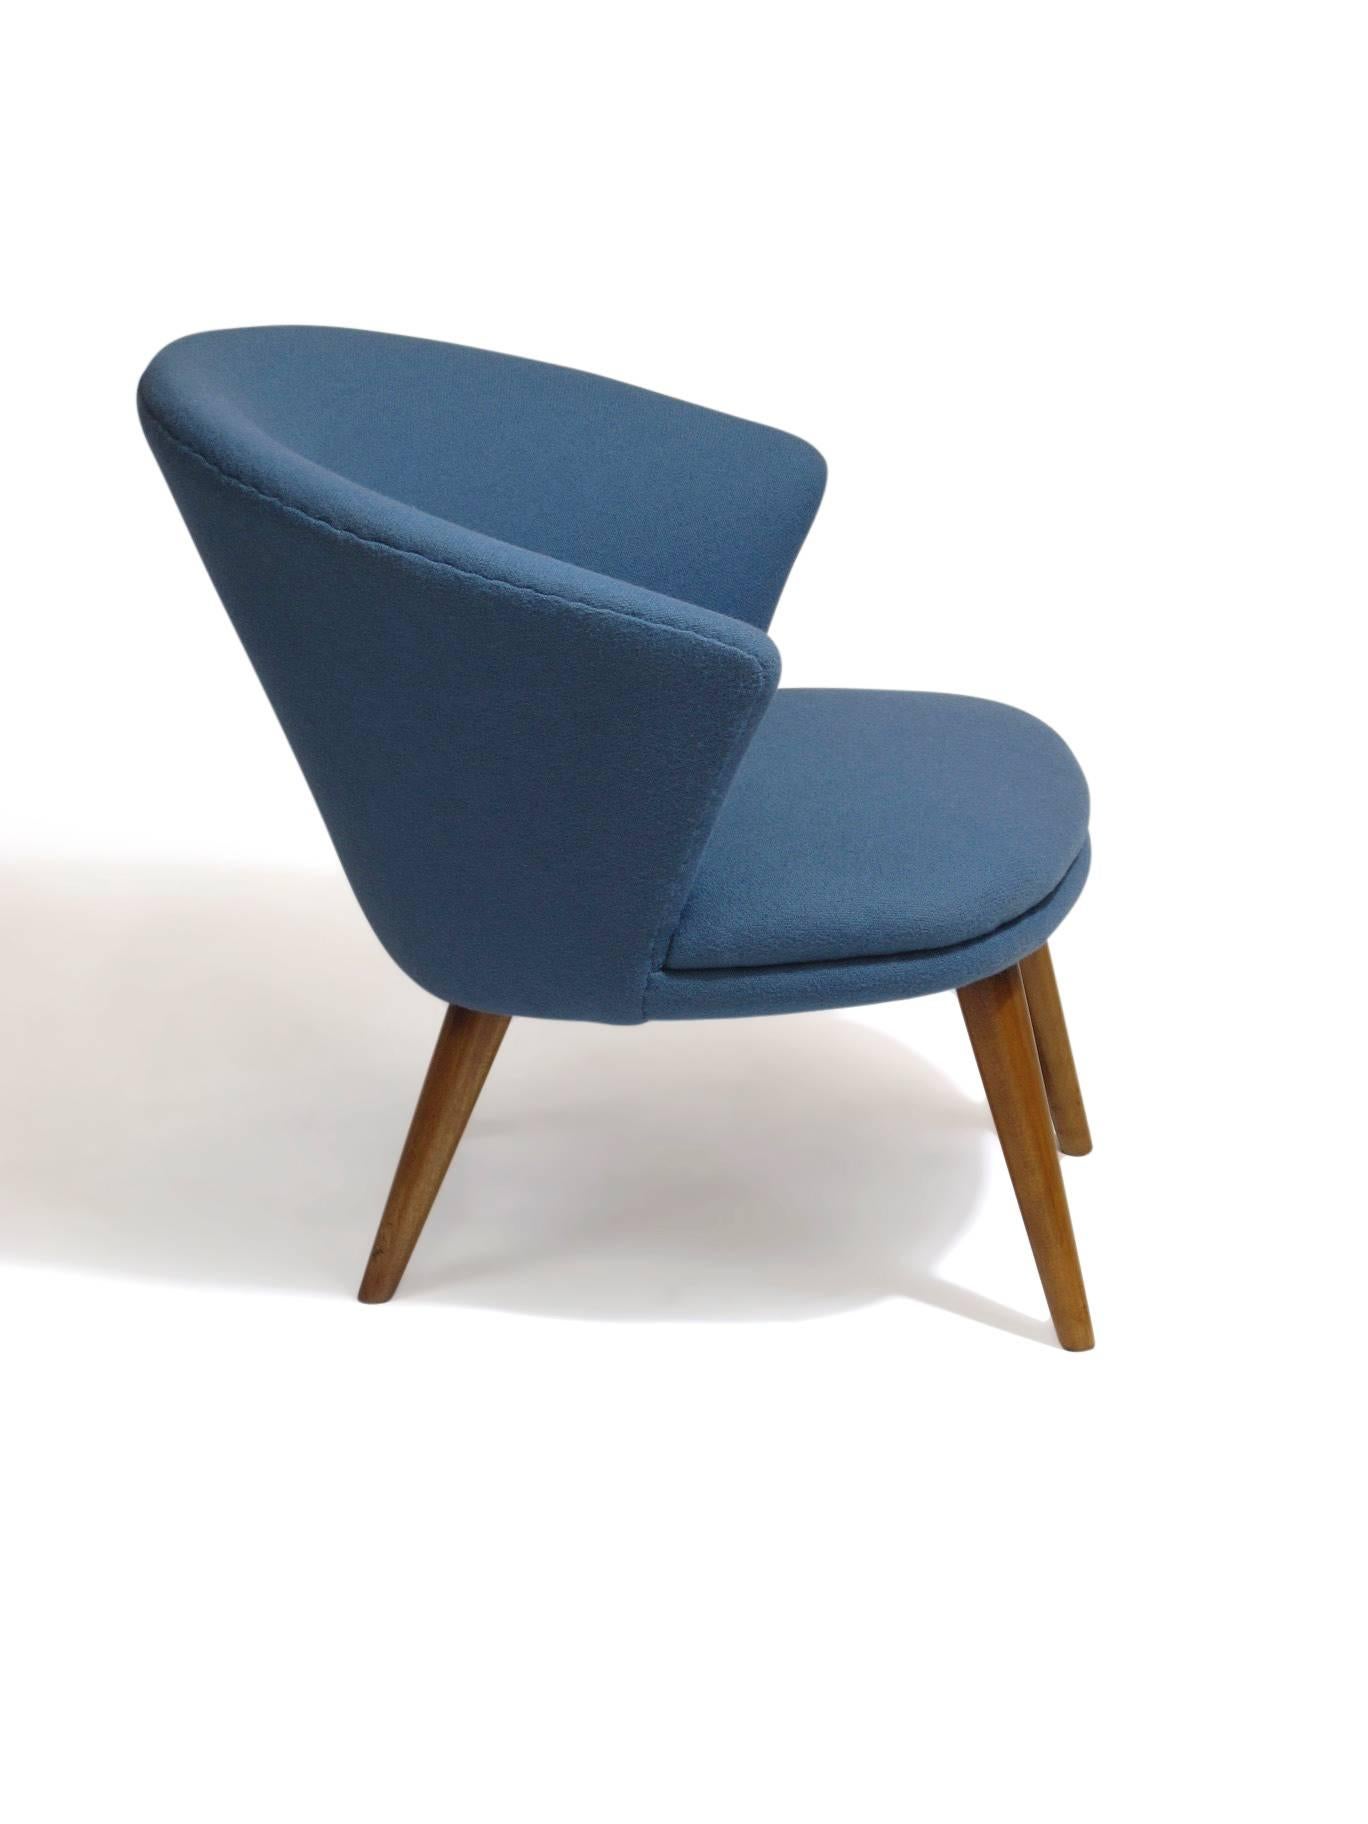 Danish lounge chair with comfortable curved back raised on tapered beech legs newly upholstered in period accurate blue wool textile.
 